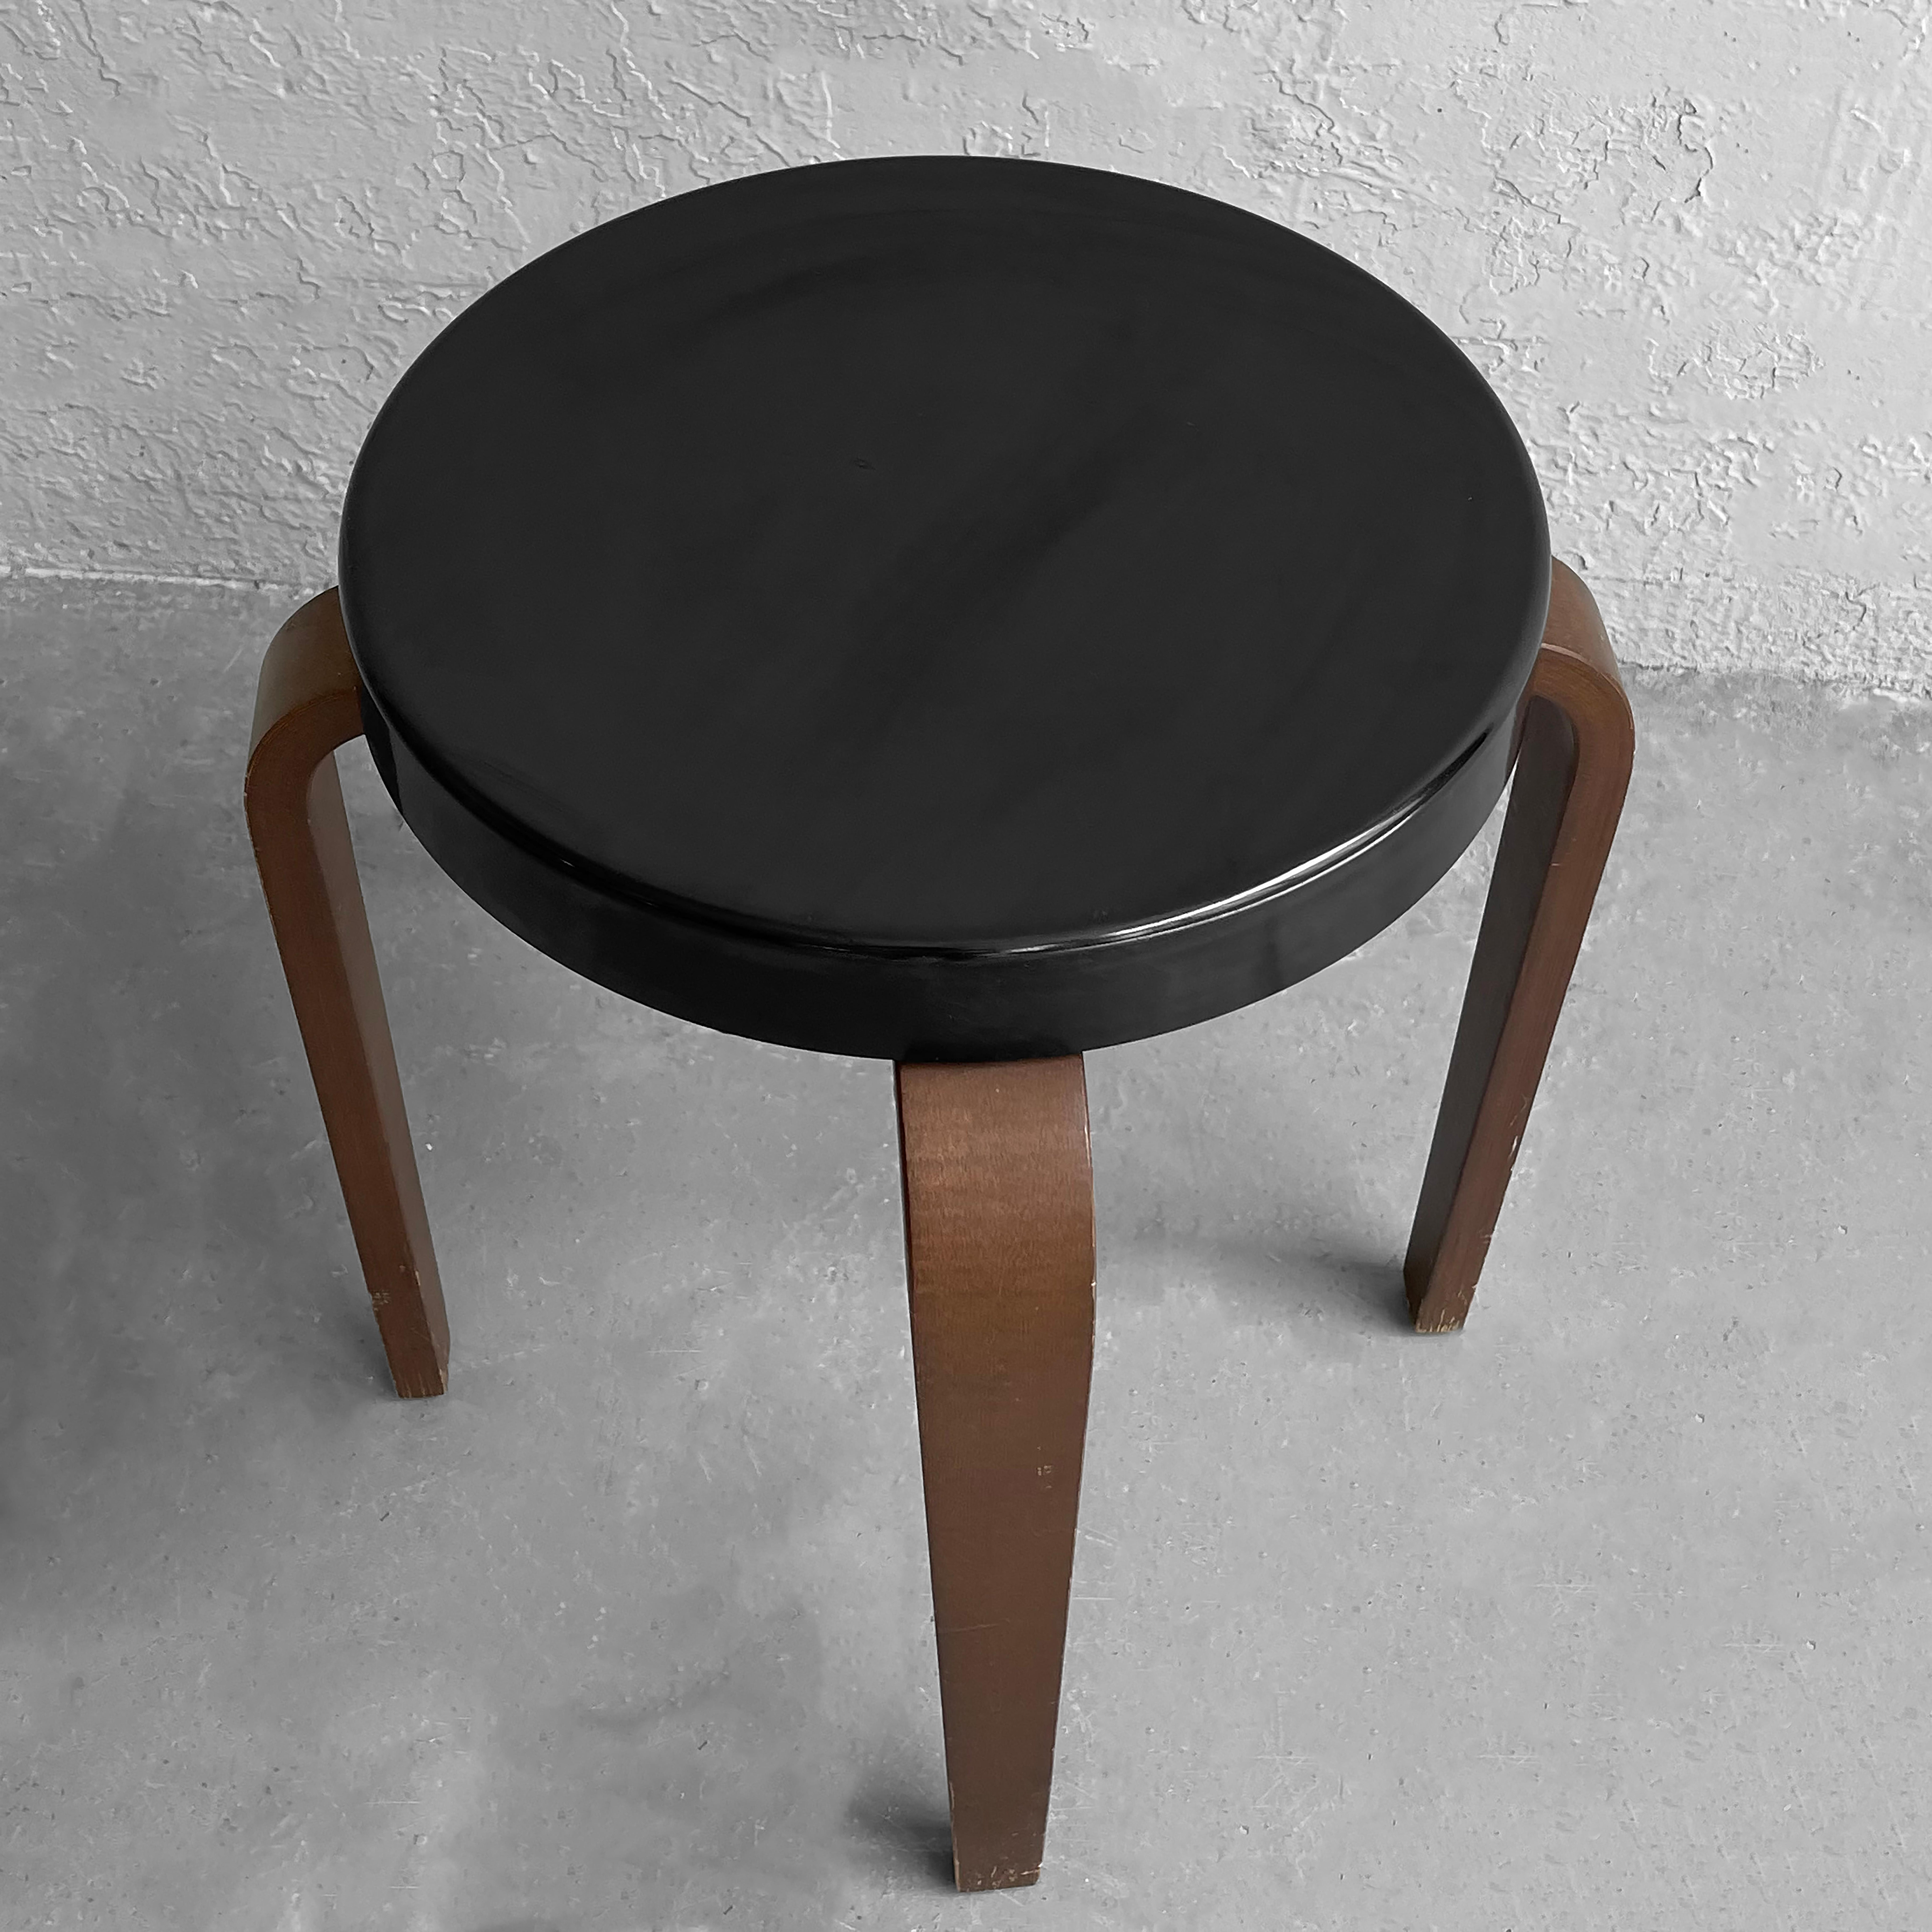 Bentwood Bakelite Stacking Stool by Thonet In Good Condition For Sale In Brooklyn, NY